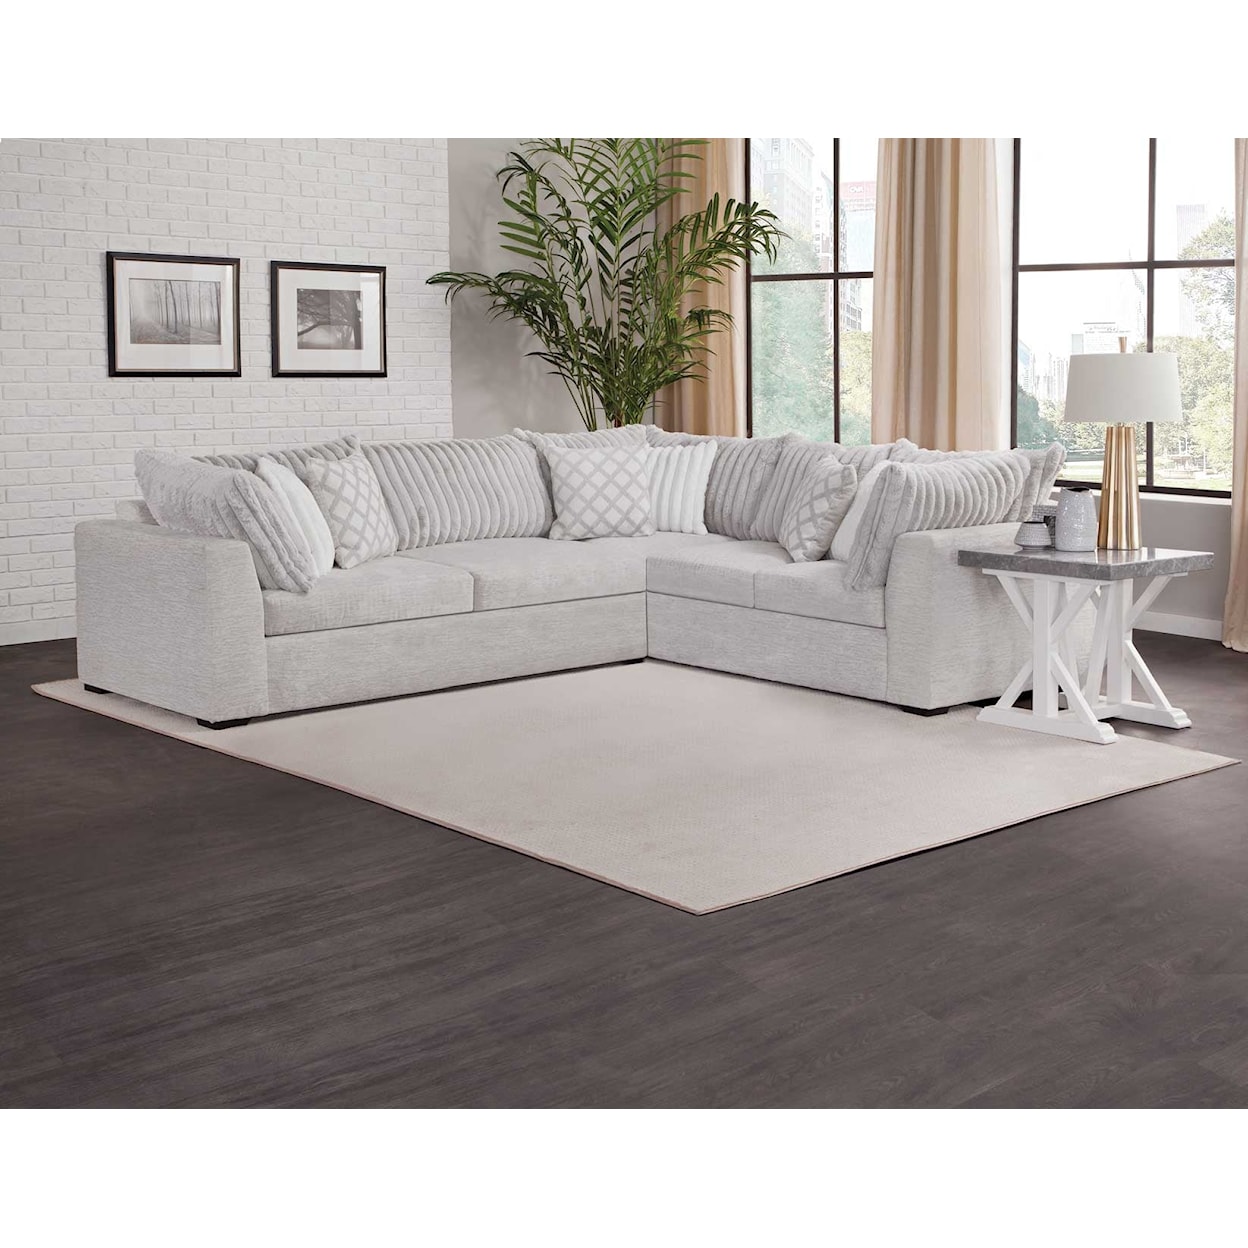 Steve Silver Miguel Sectional Sofa